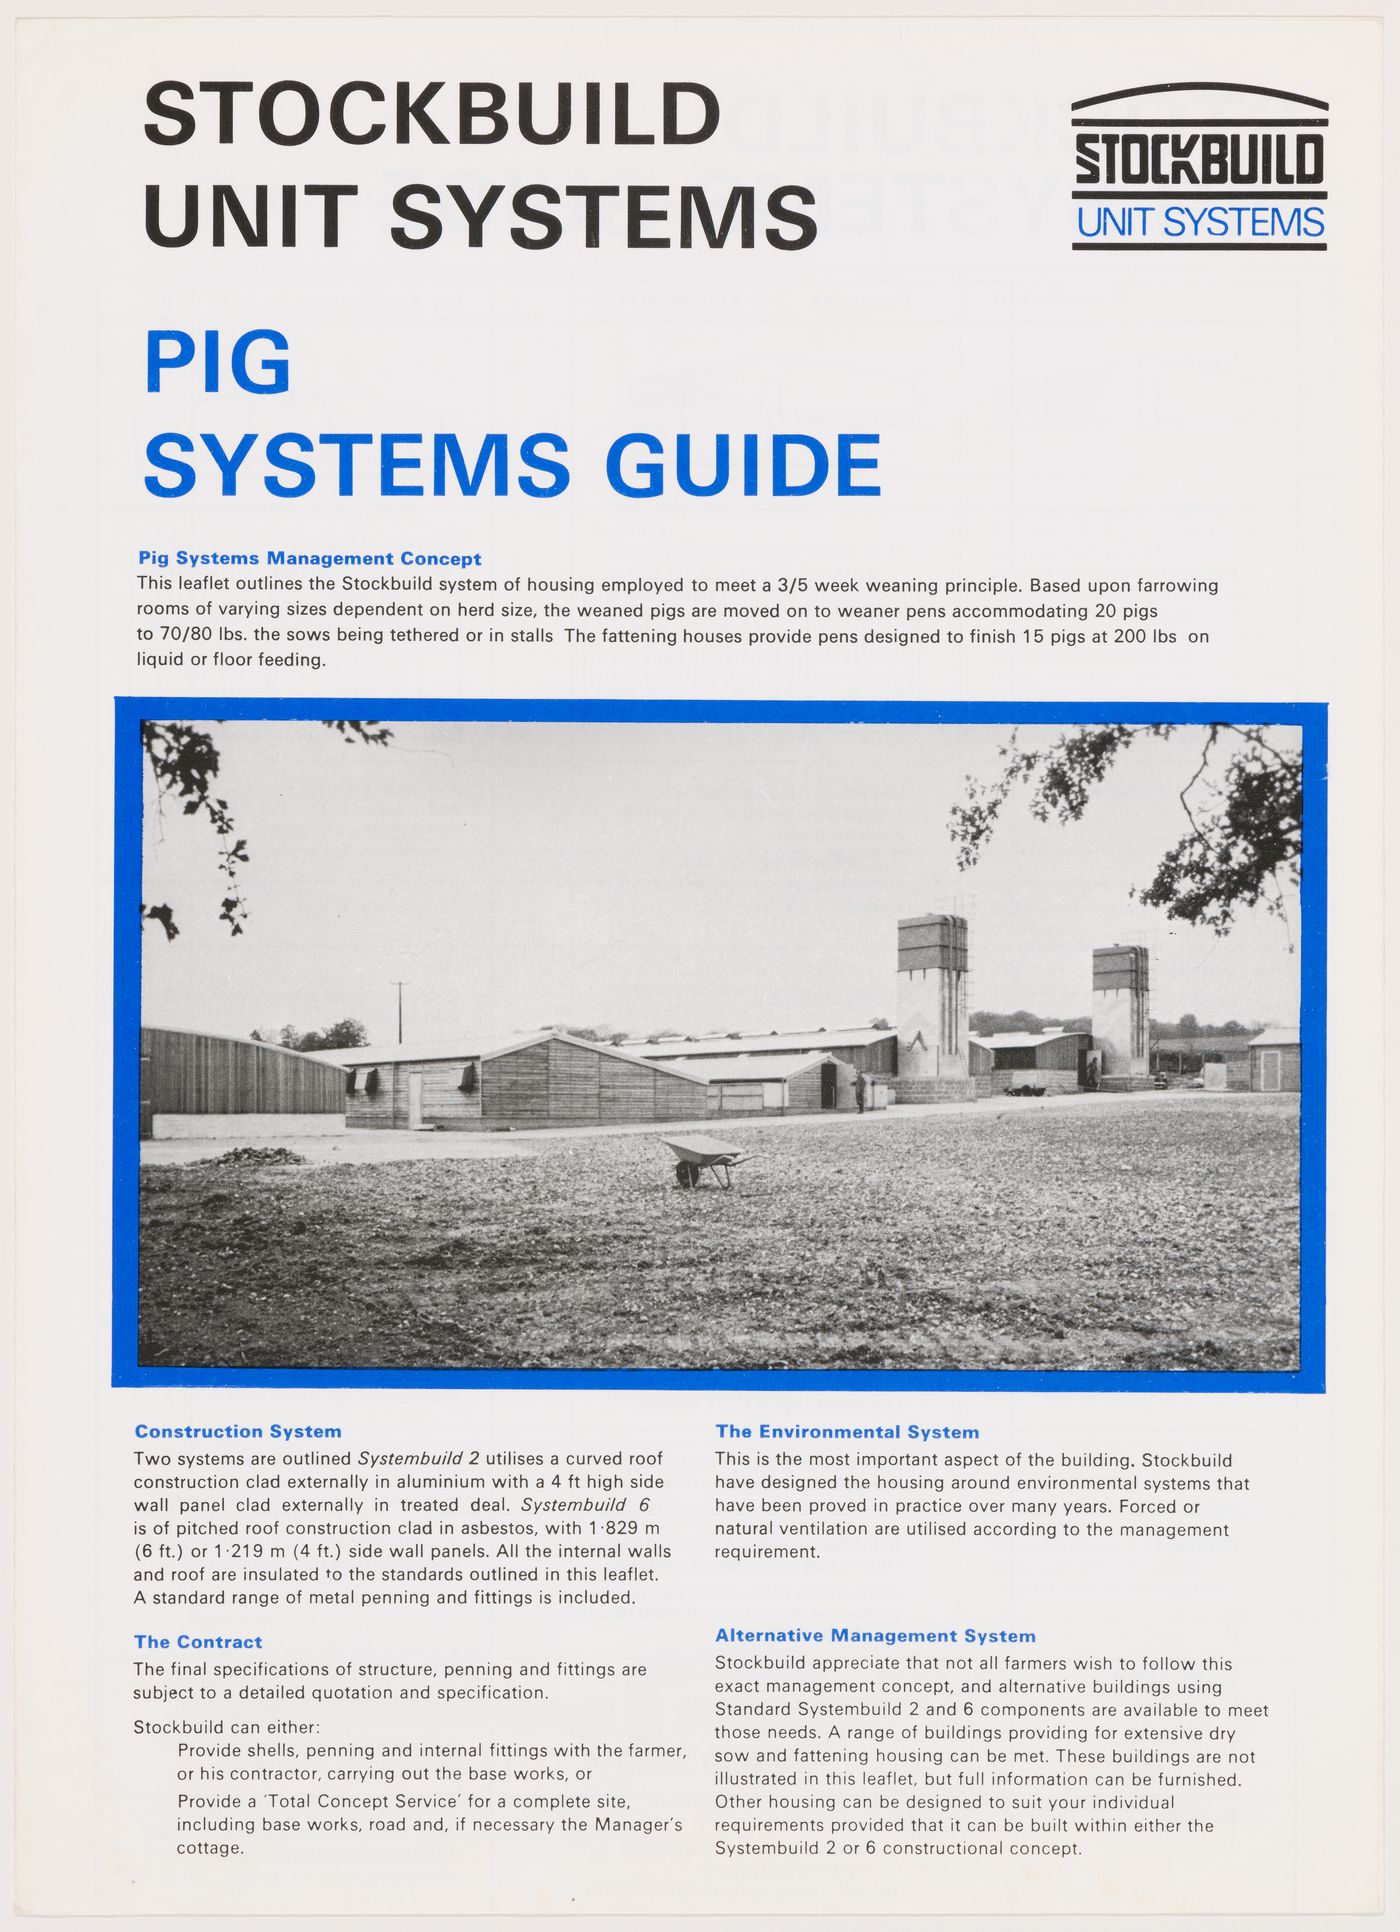 Pig systems guide issued by Stockbuild Unit Systems, from the project file "Westpen"